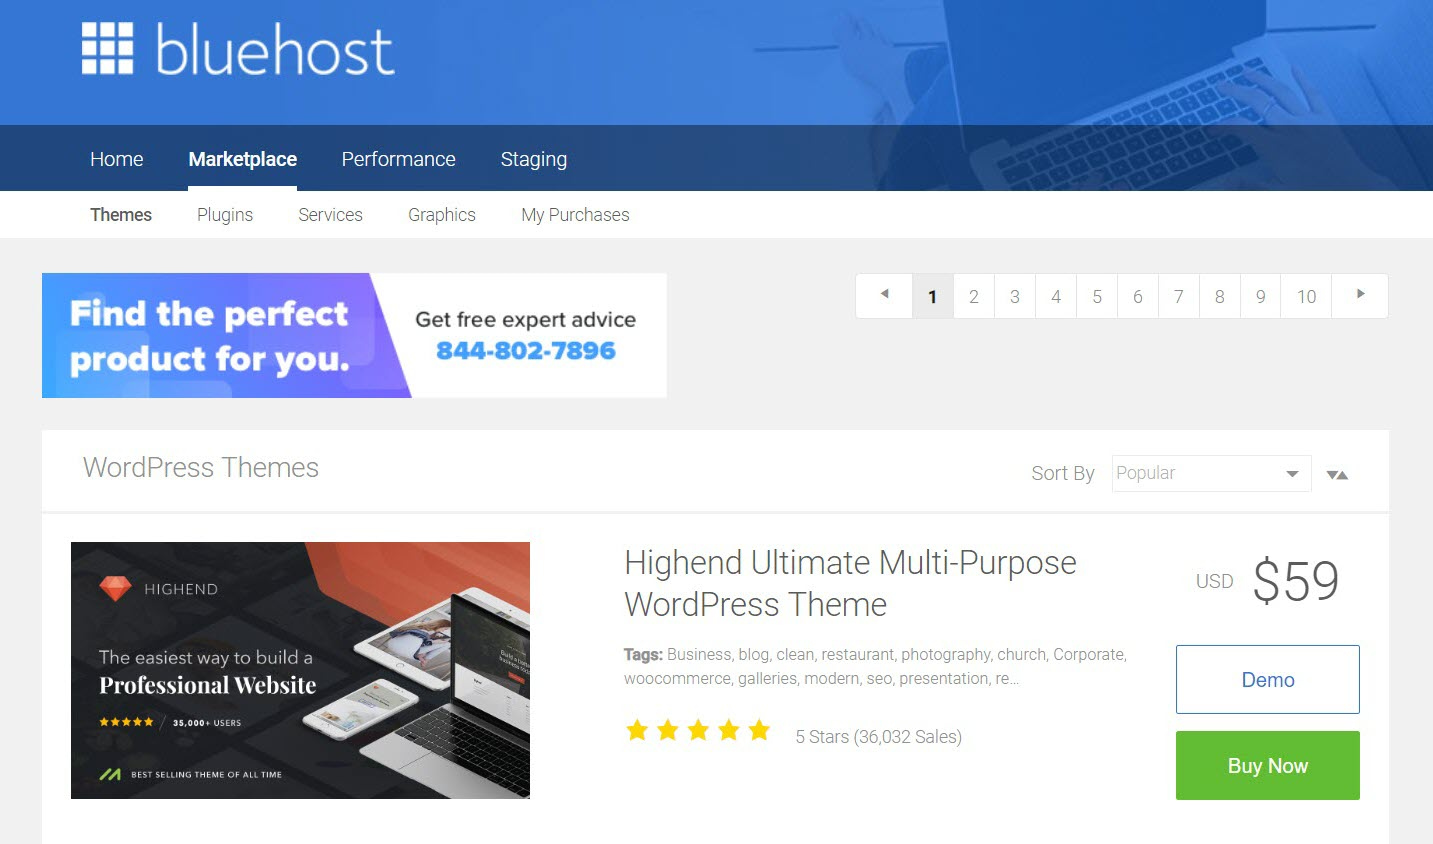 The Bluehost marketplace after you install WordPress